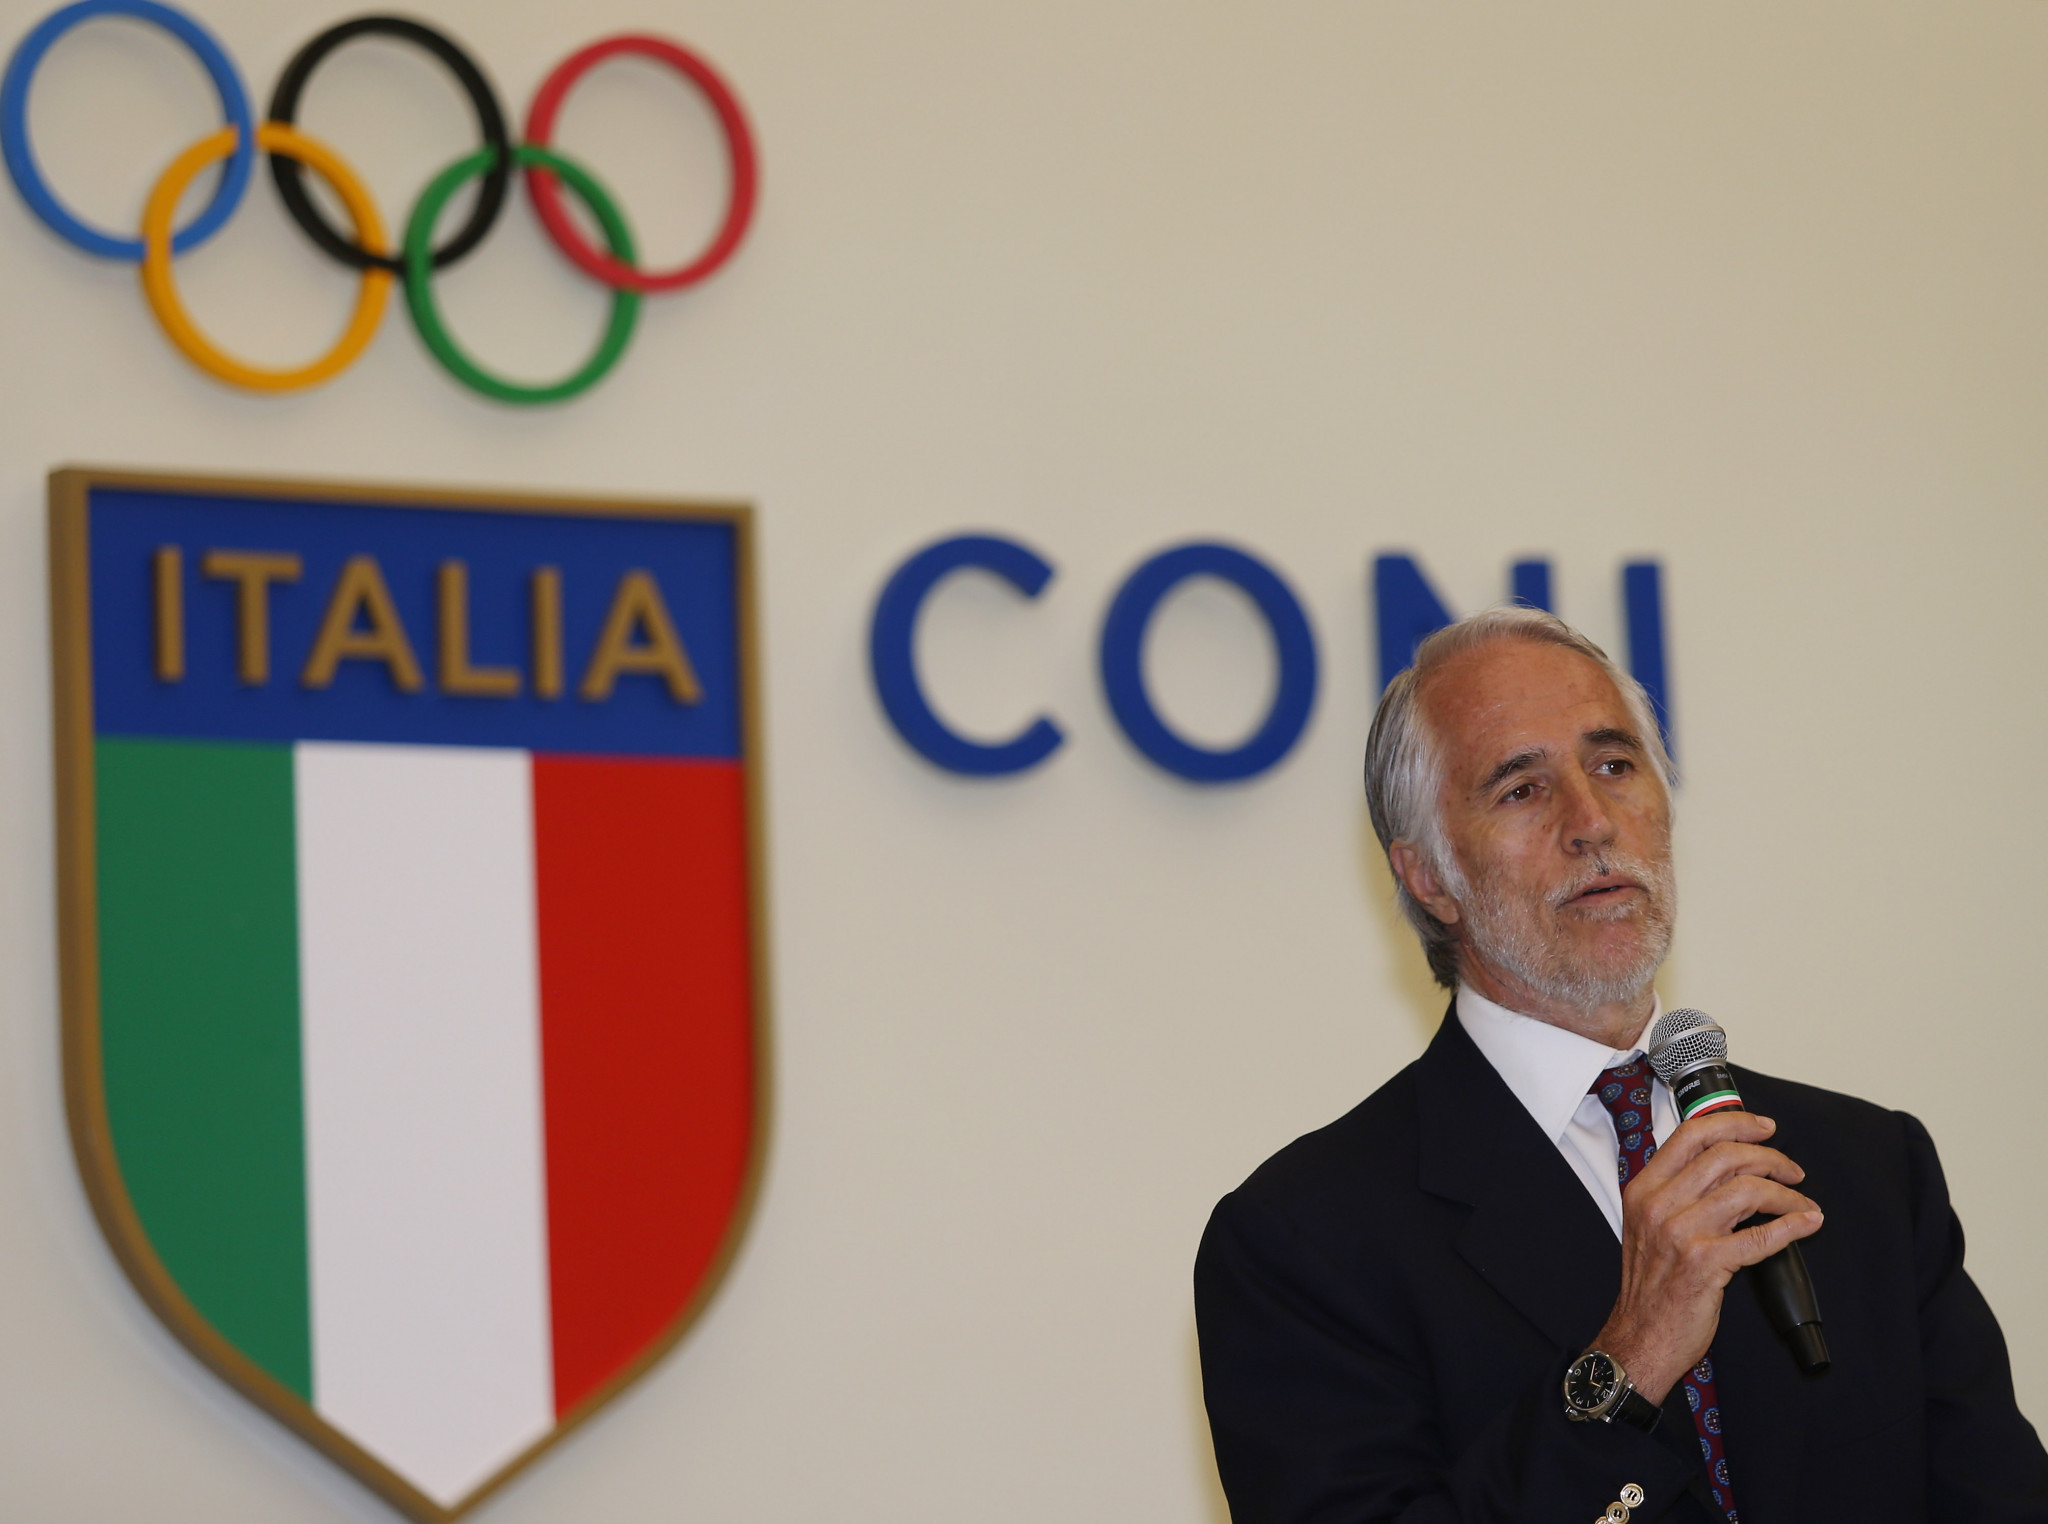 CONI and its President Giovanni Malagò have begun a week-long process to evaluate the three bids ©Getty Images